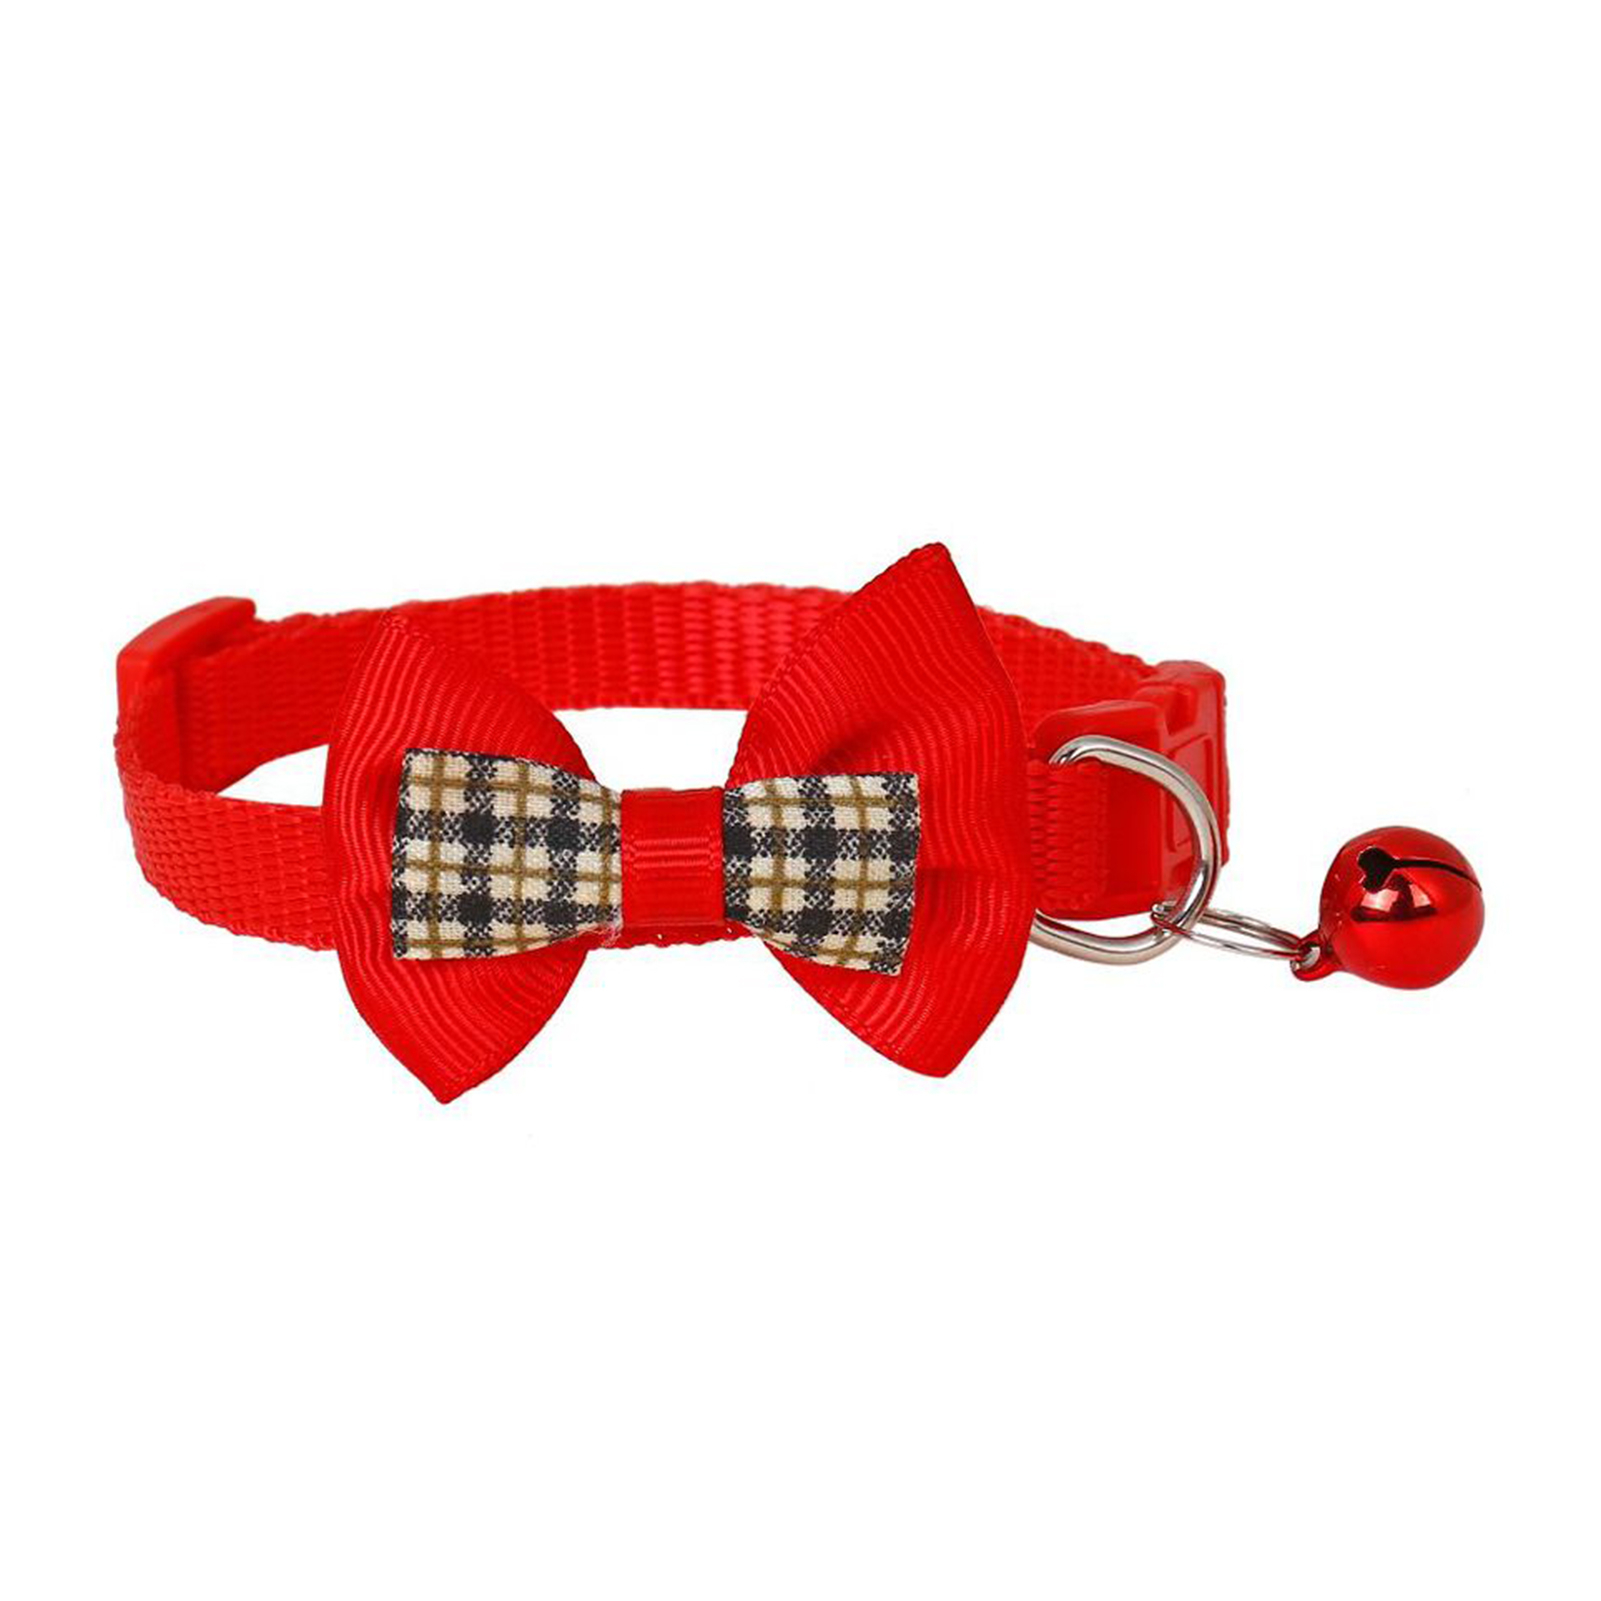 Large Red Polka Dot Adjustable Sizes S Kitten Cat Collar with Flower or Bow Tie Medium